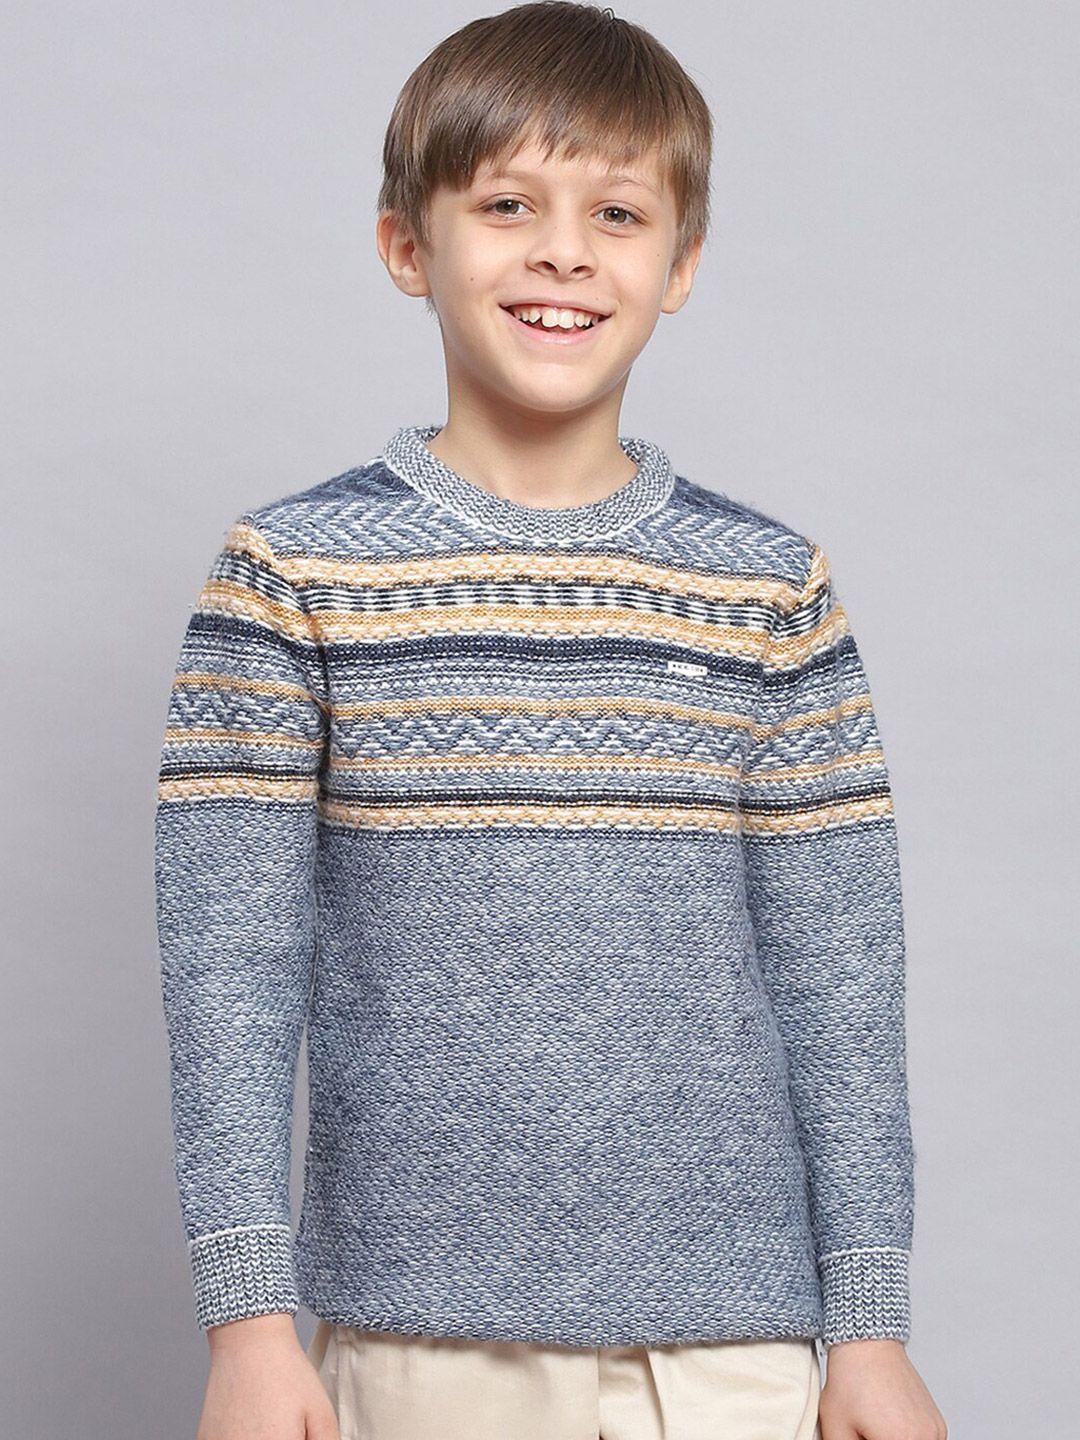 monte carlo boys geometric self designed long sleeves ribbed pullover